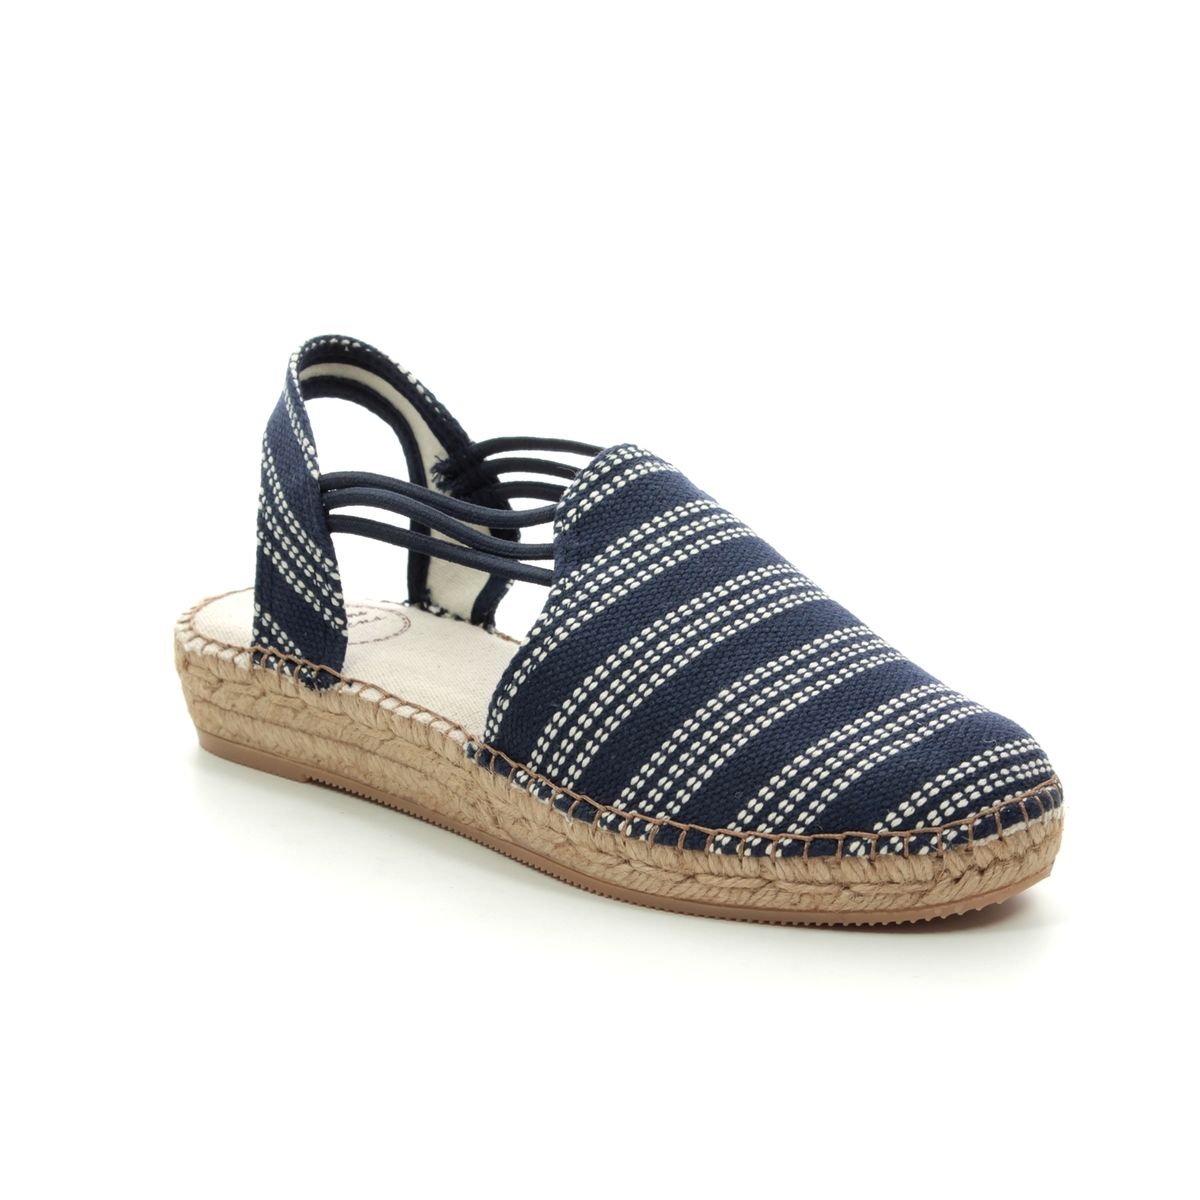 Toni Pons Norma In Navy 9103-70 In Size 40 In Plain Navy